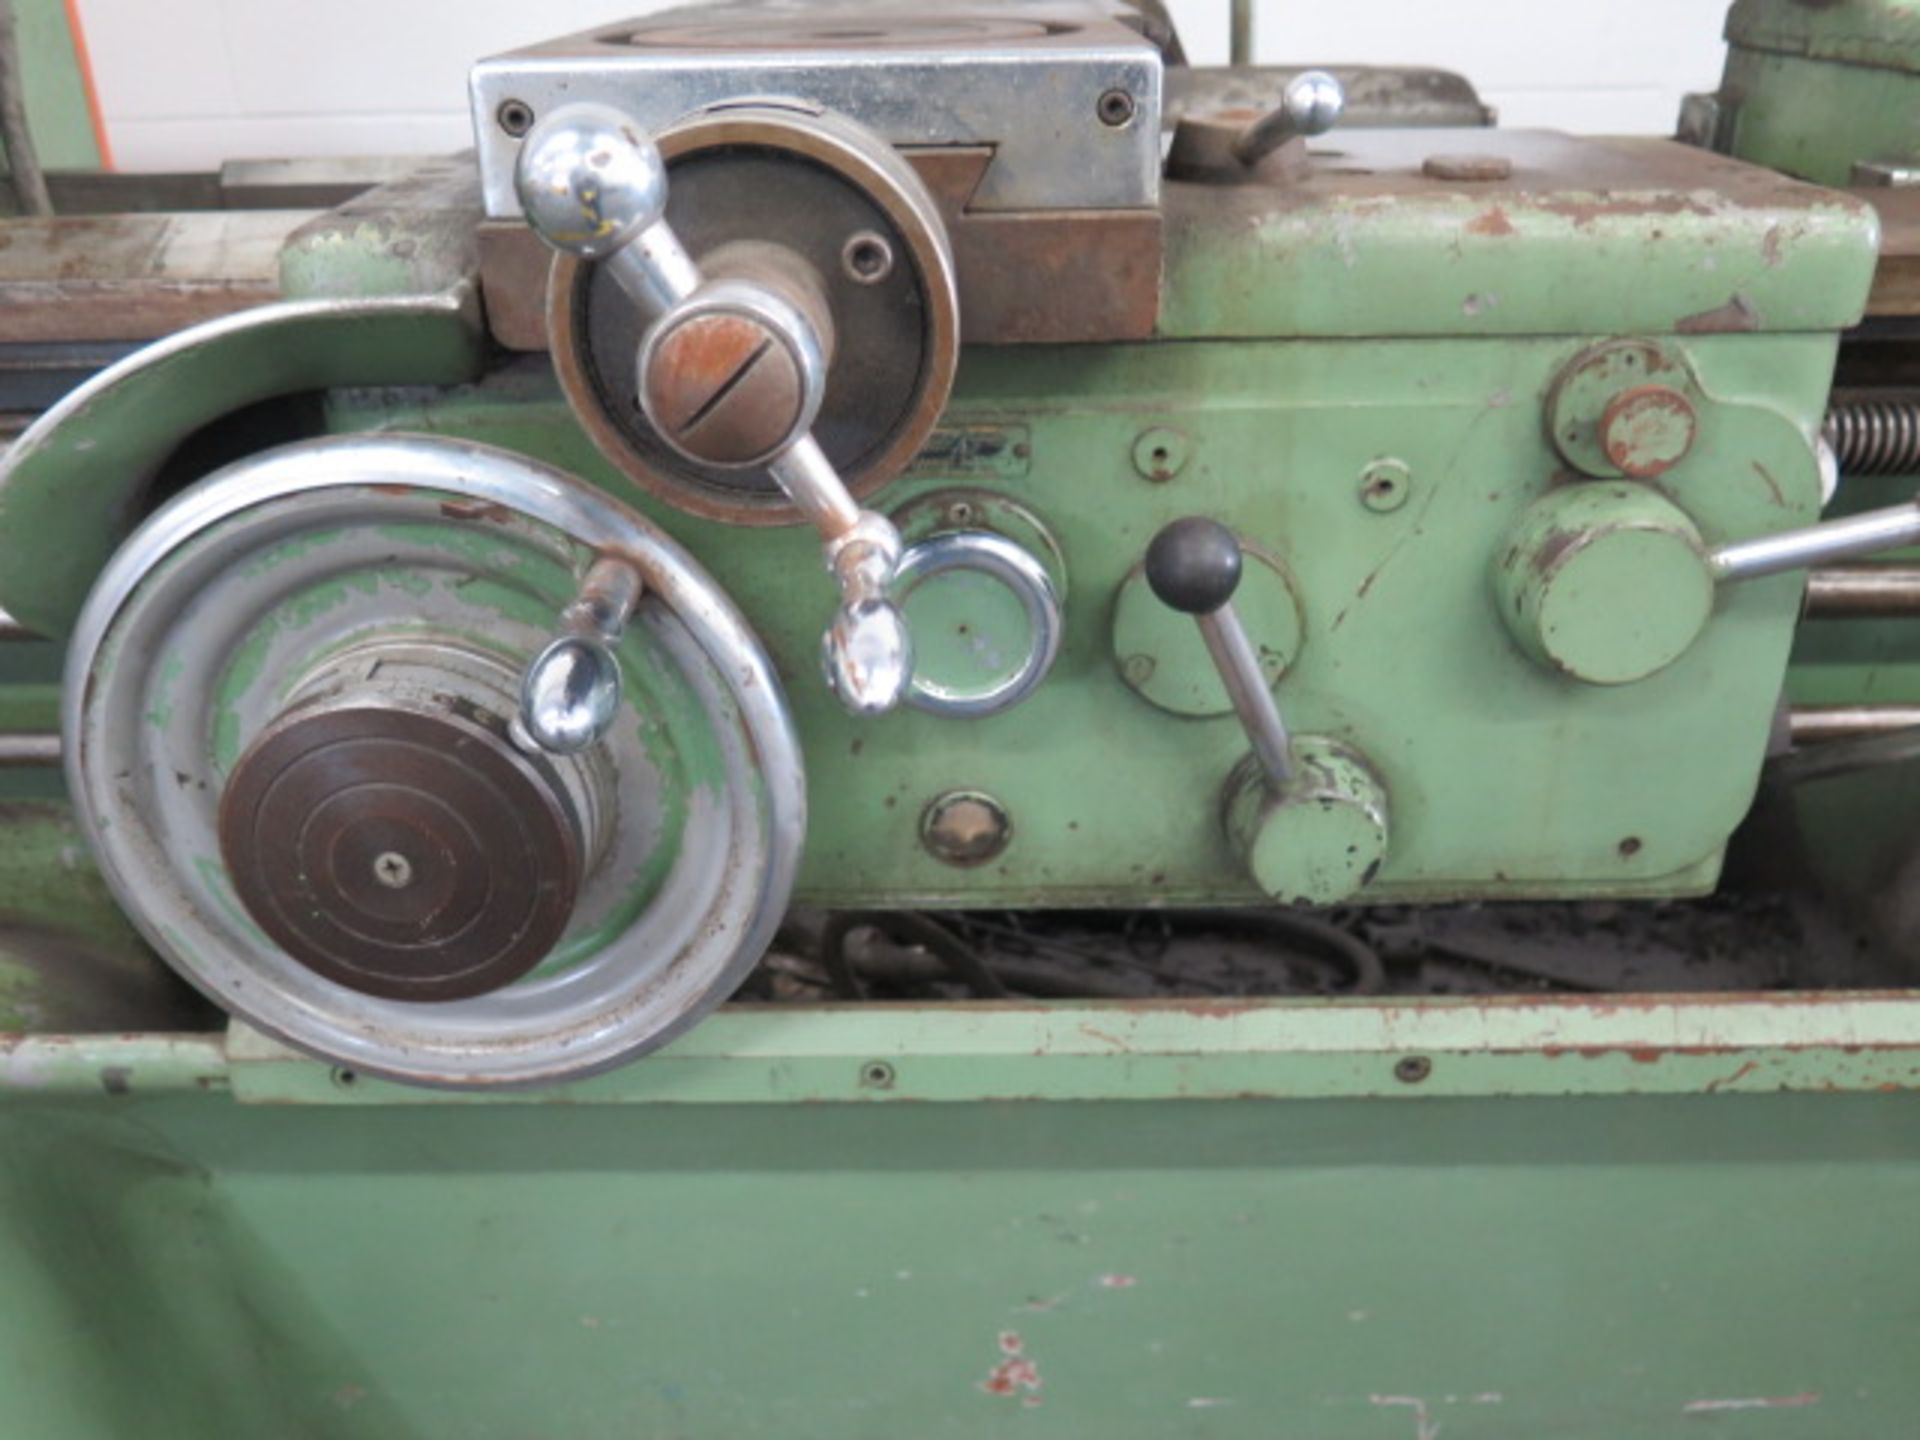 Okuma type LS Gap Bed Lathe (MISSING CROSS SLIDE ASSEMBLY) s/n 4707-3896 w/ SOLD AS IS - Image 12 of 13